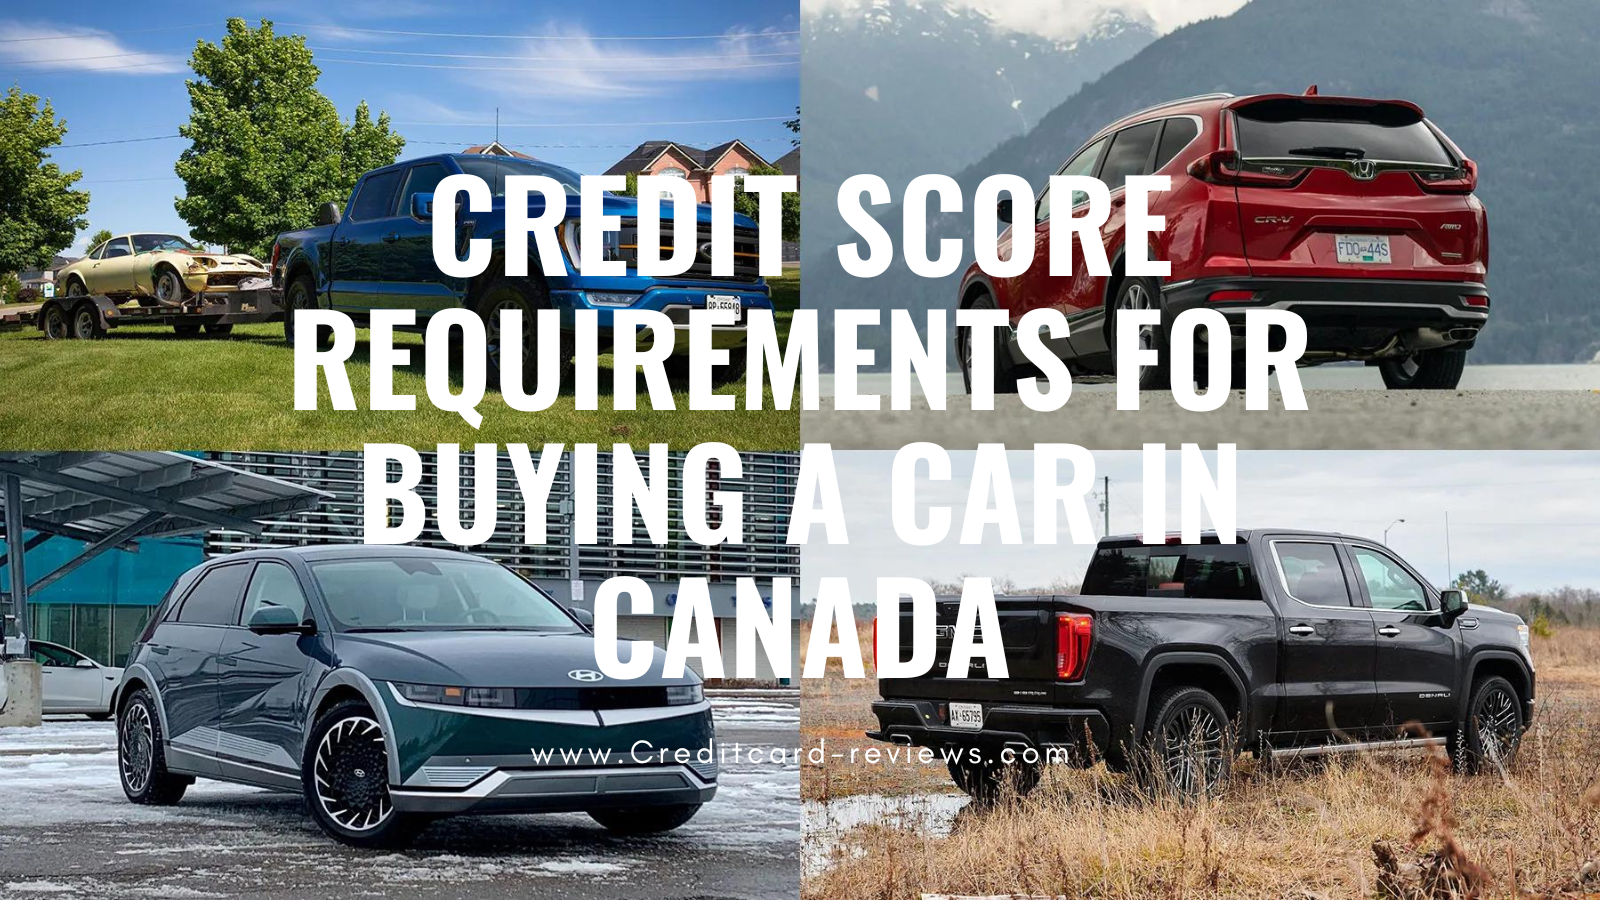 Credit Score Requirements for Buying a Car in Canada